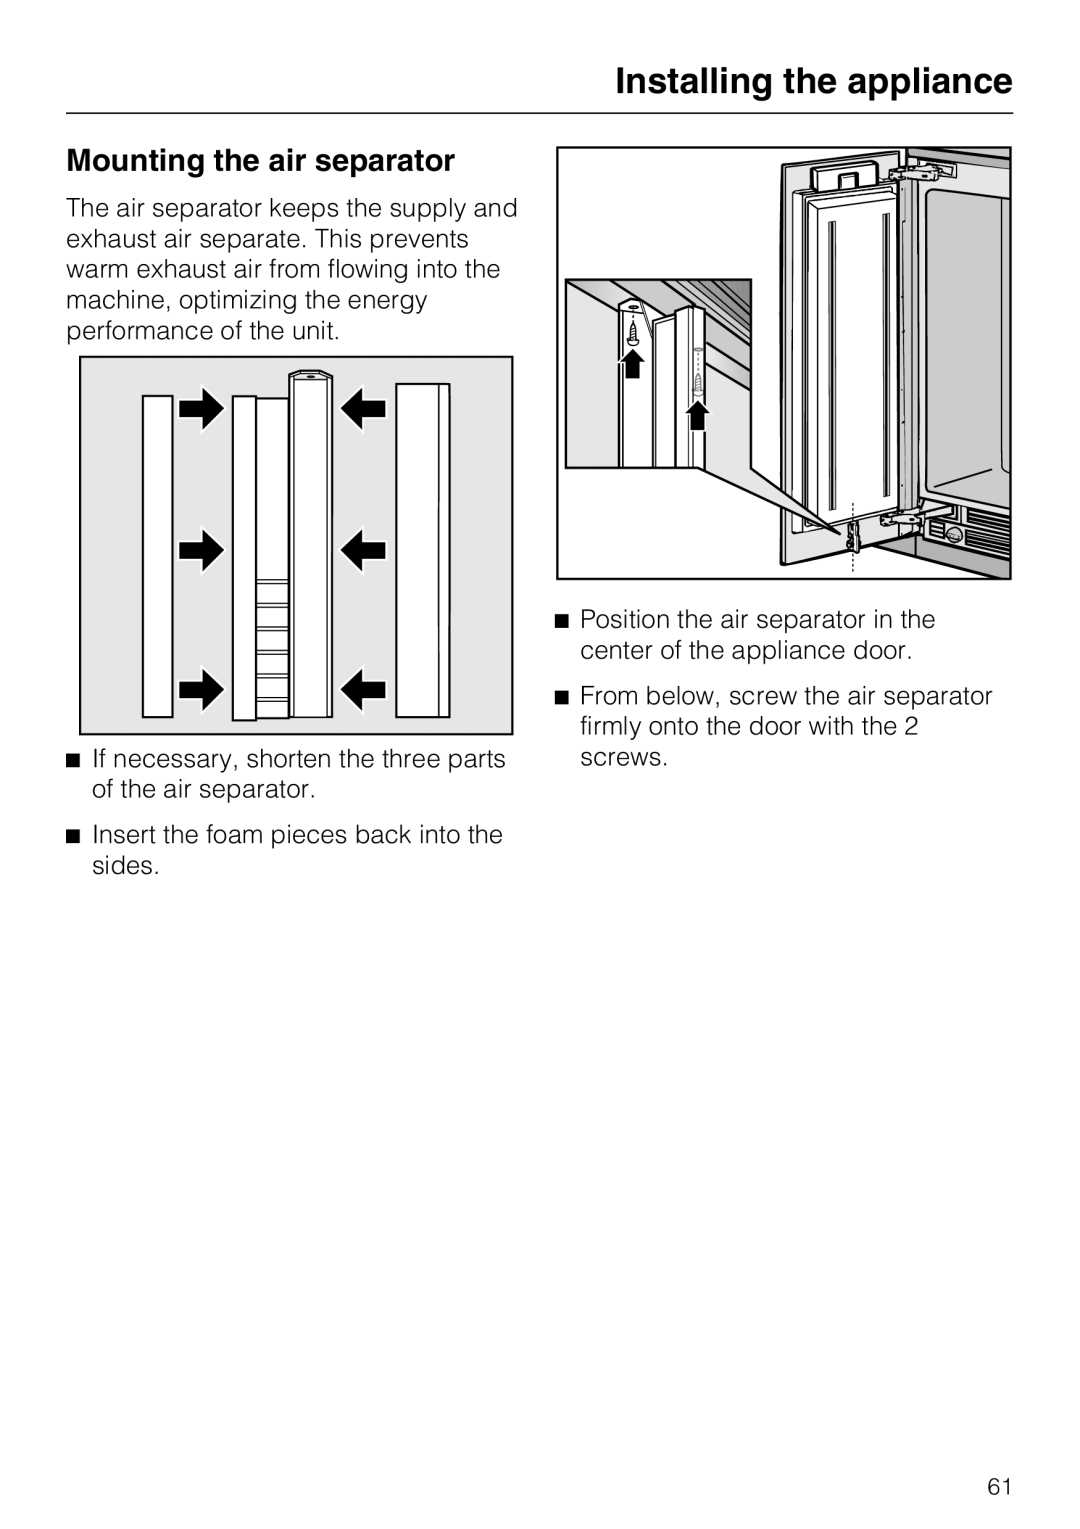 Miele F1911SF, F1801SF, F1811SF, F1901SF installation instructions Mounting the air separator, Installing the appliance 